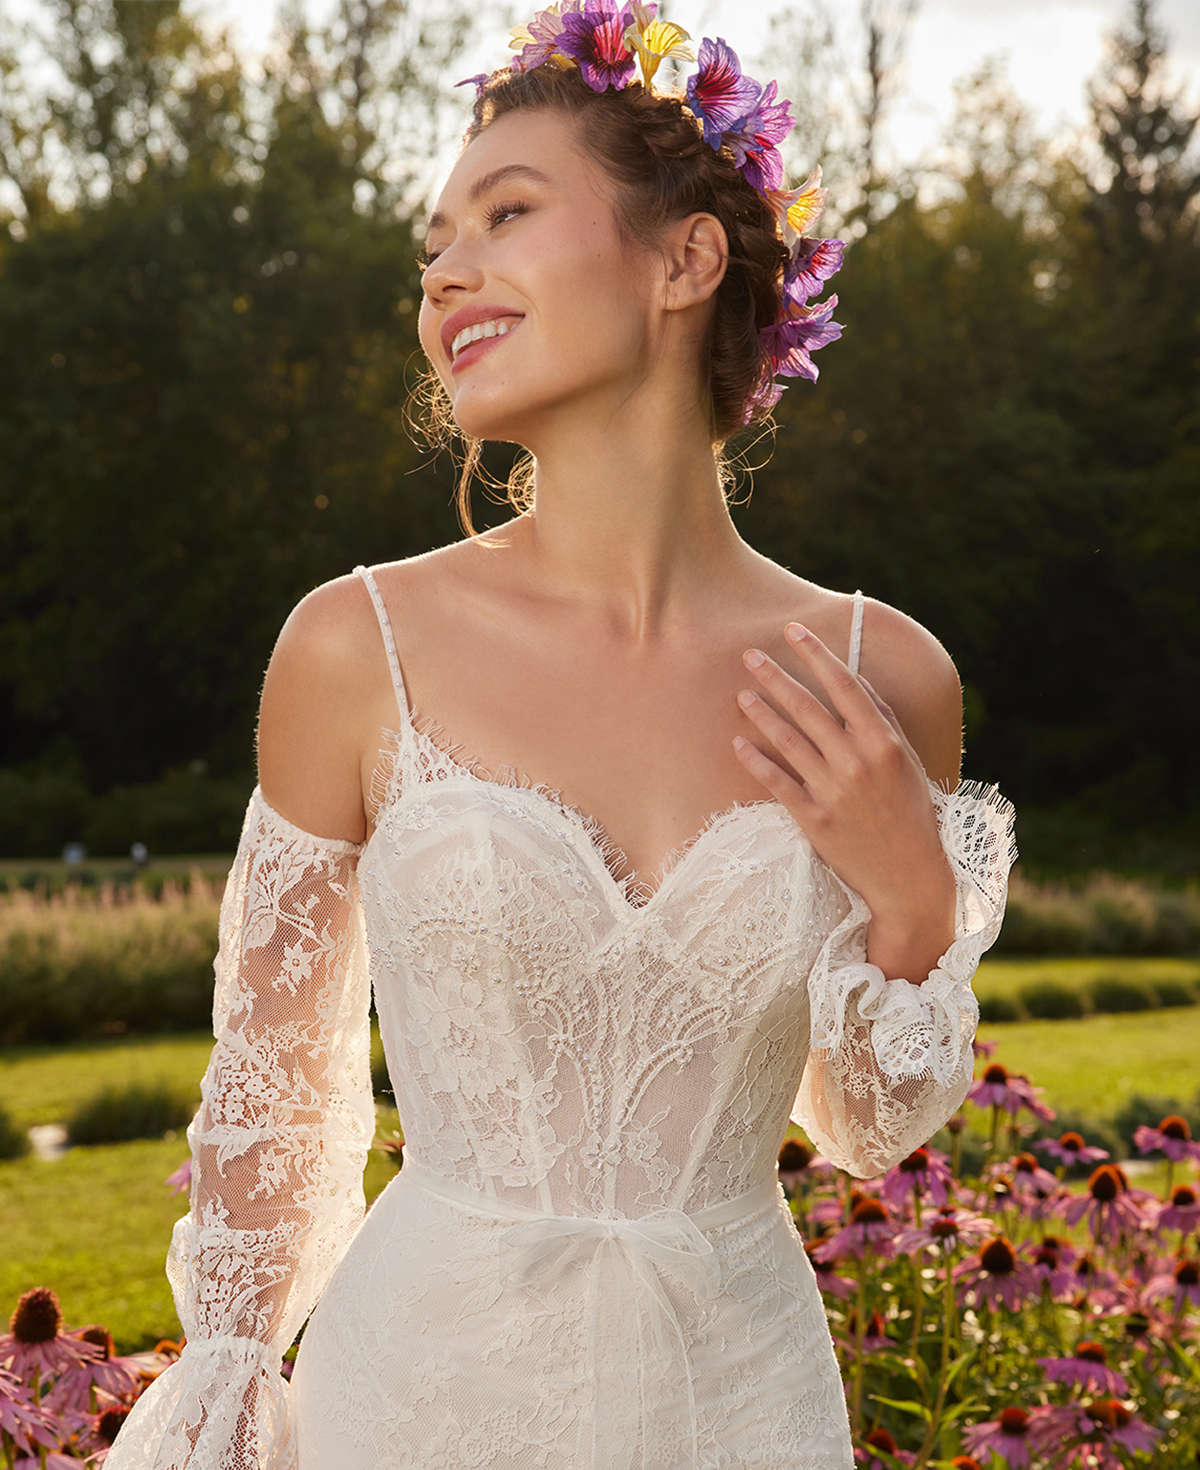 Lace Sheath Wedding Dress with Sleeves and Spaghetti Straps